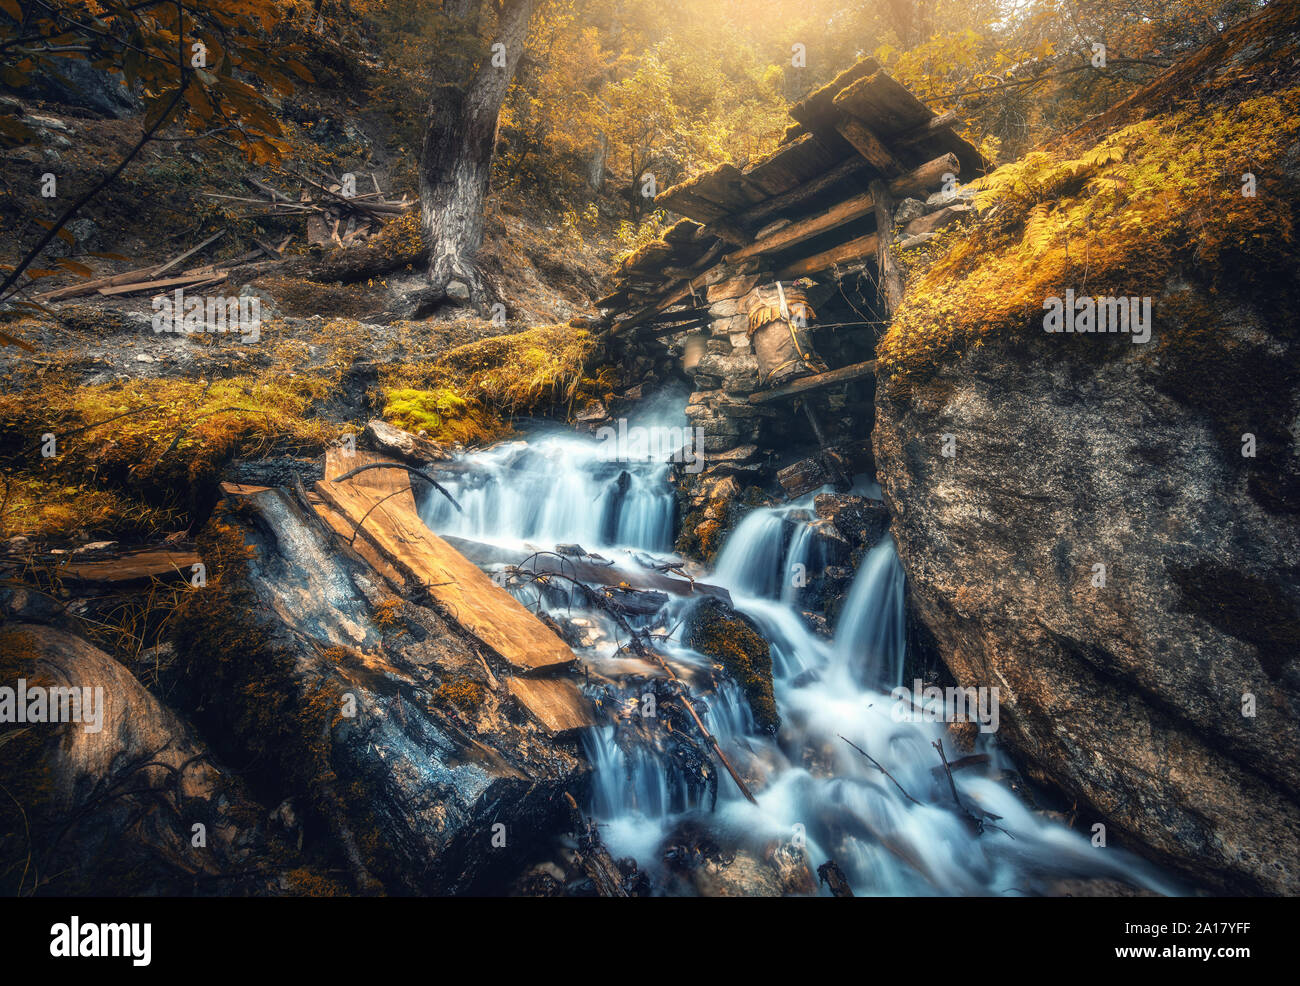 Stony well in colorful orange forest with little waterfall Stock Photo